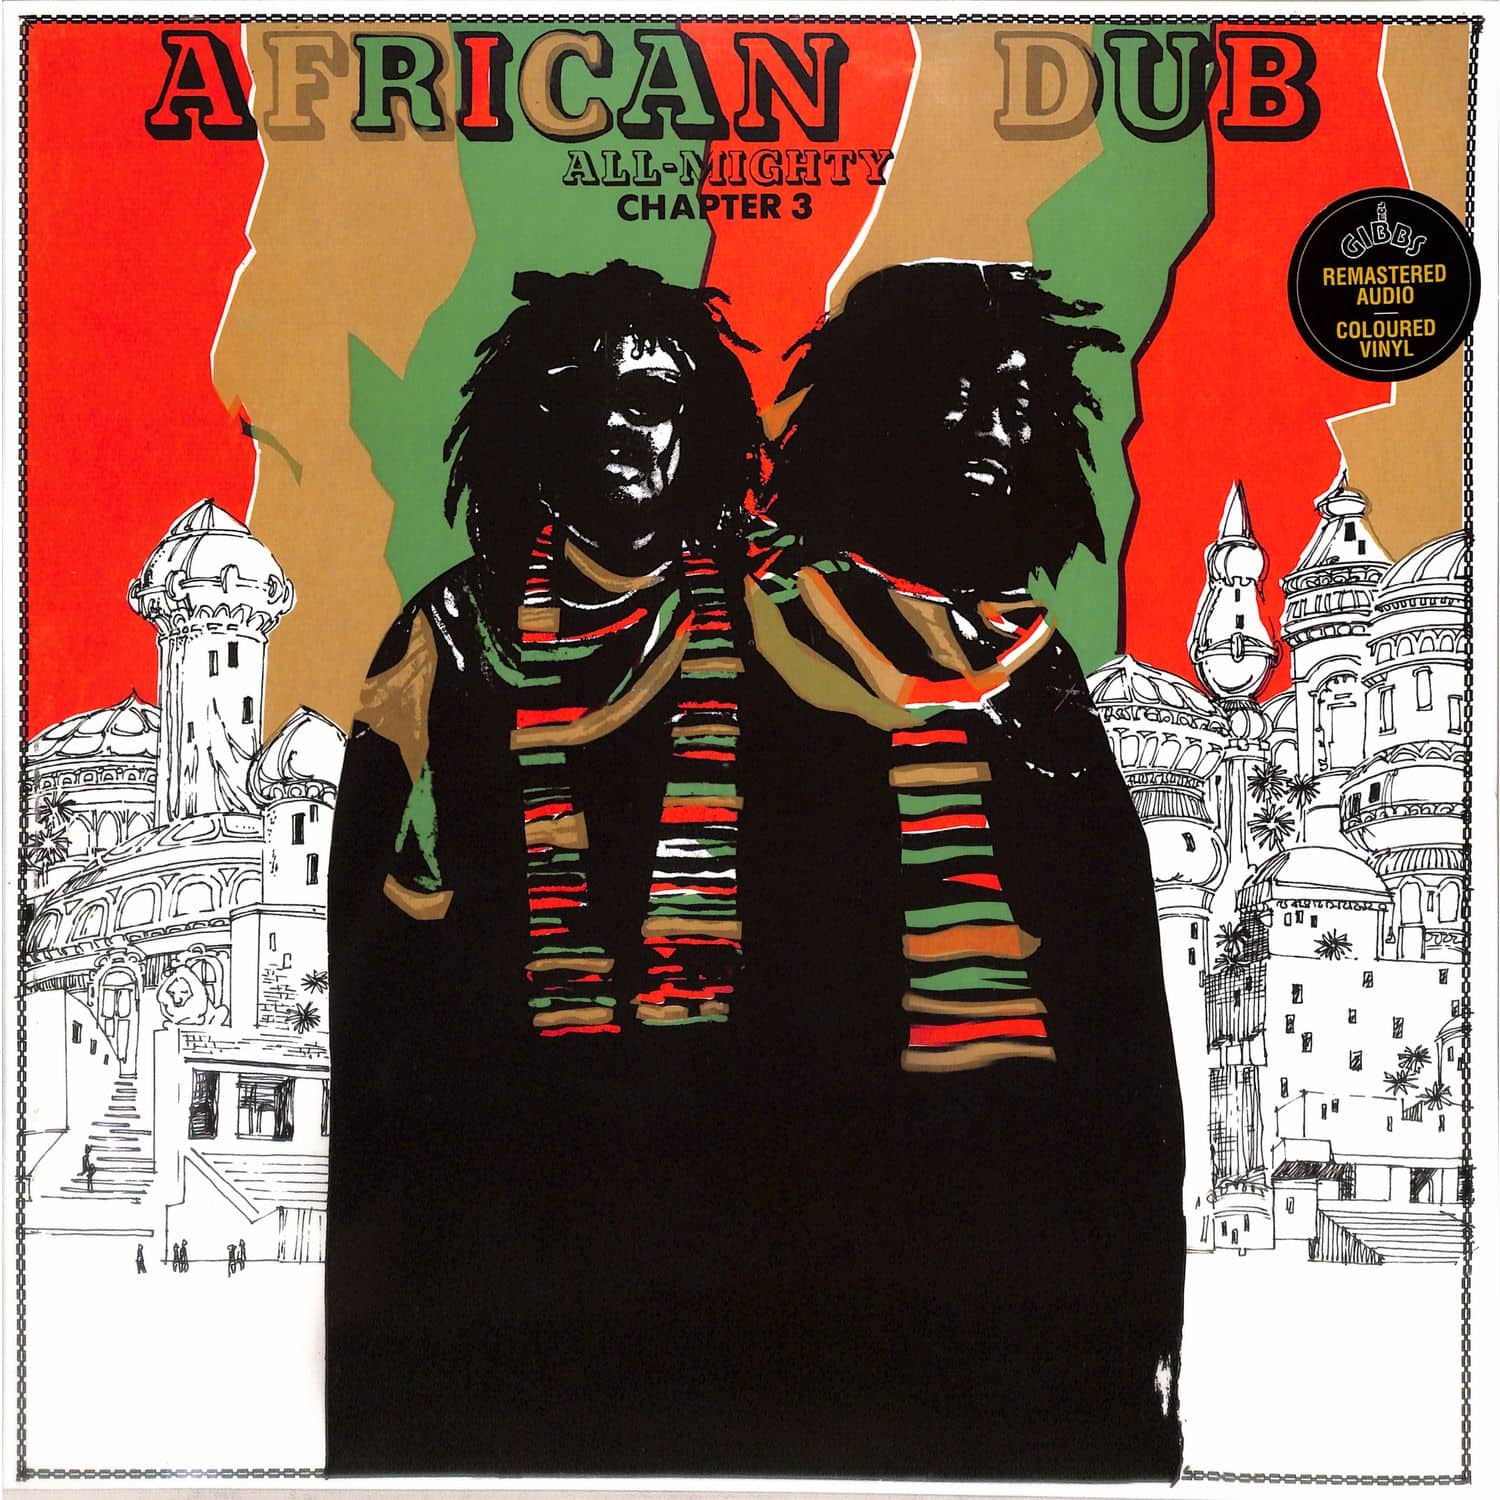 Joe Gibbs / The Professionals - AFRICAN DUB ALL-MIGHTY CHAPTER 3 